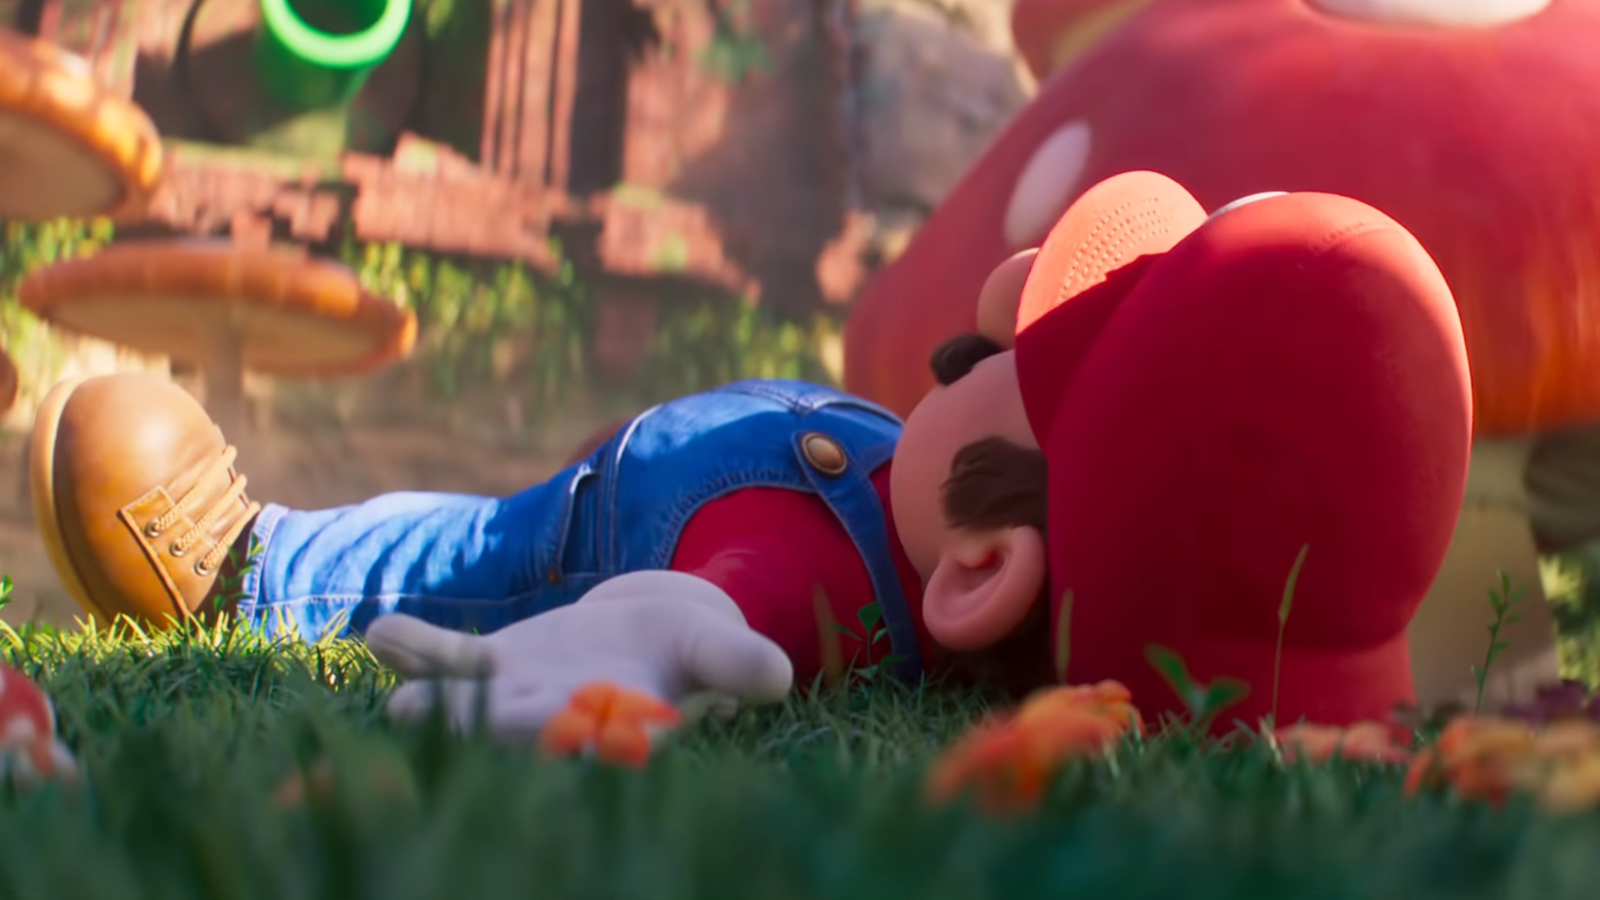 Mario movie advert leak reveals Peach for the first time